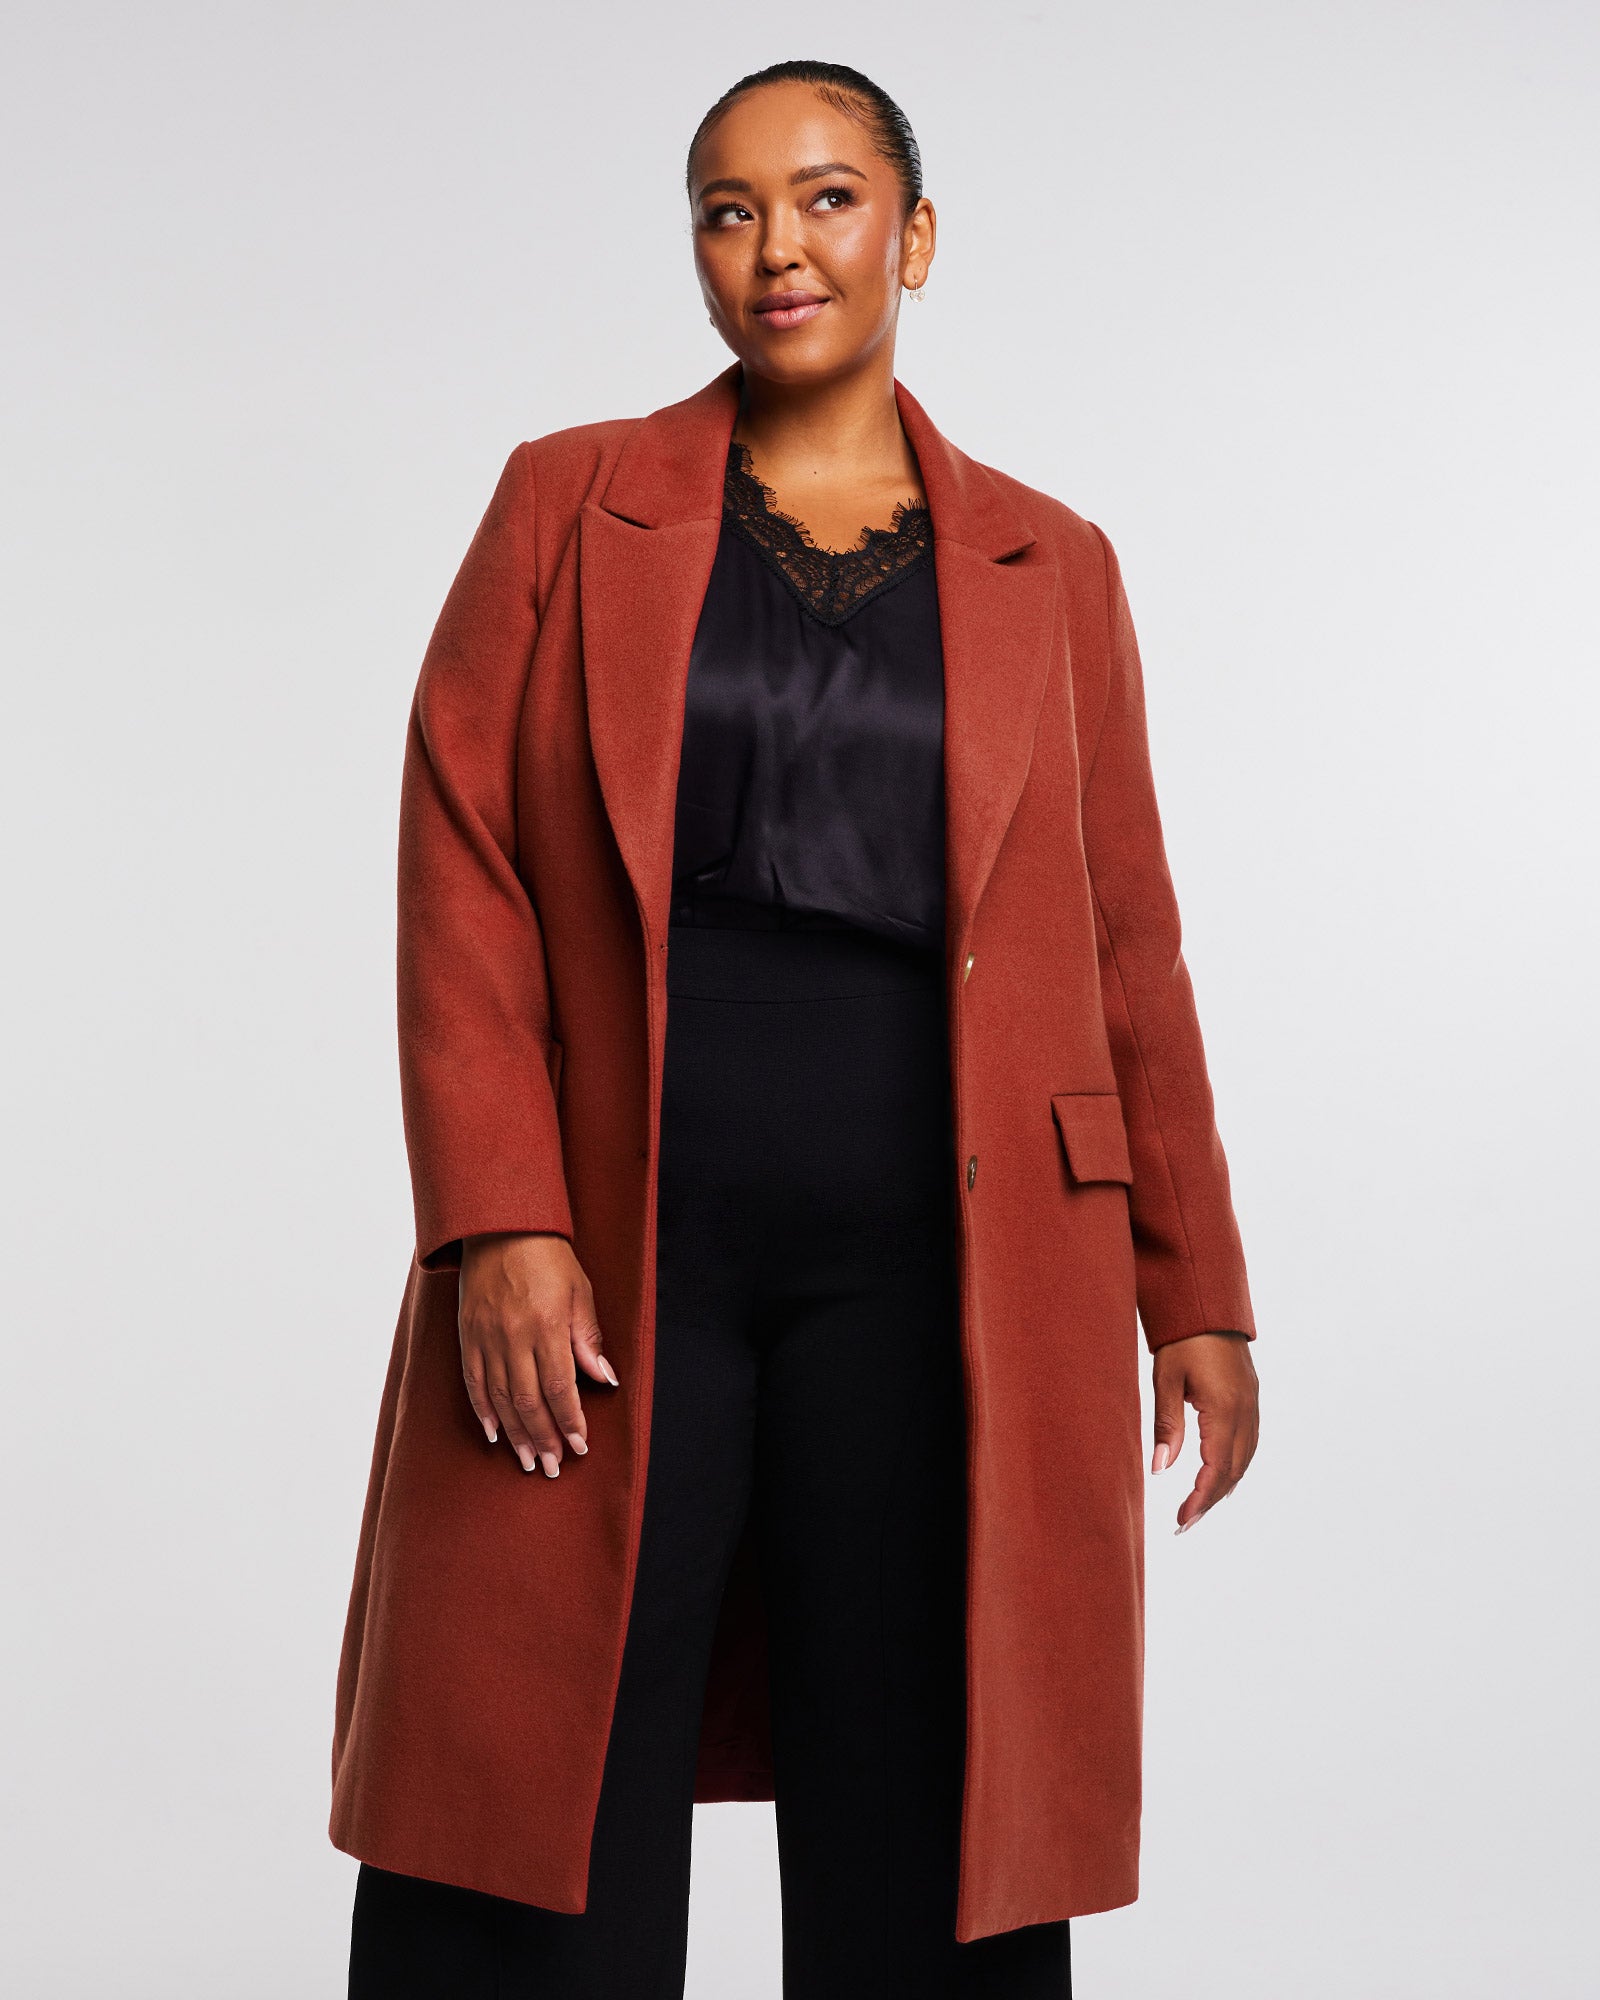 A plus-sized woman wearing a red Mia Rust Full-Length coat.